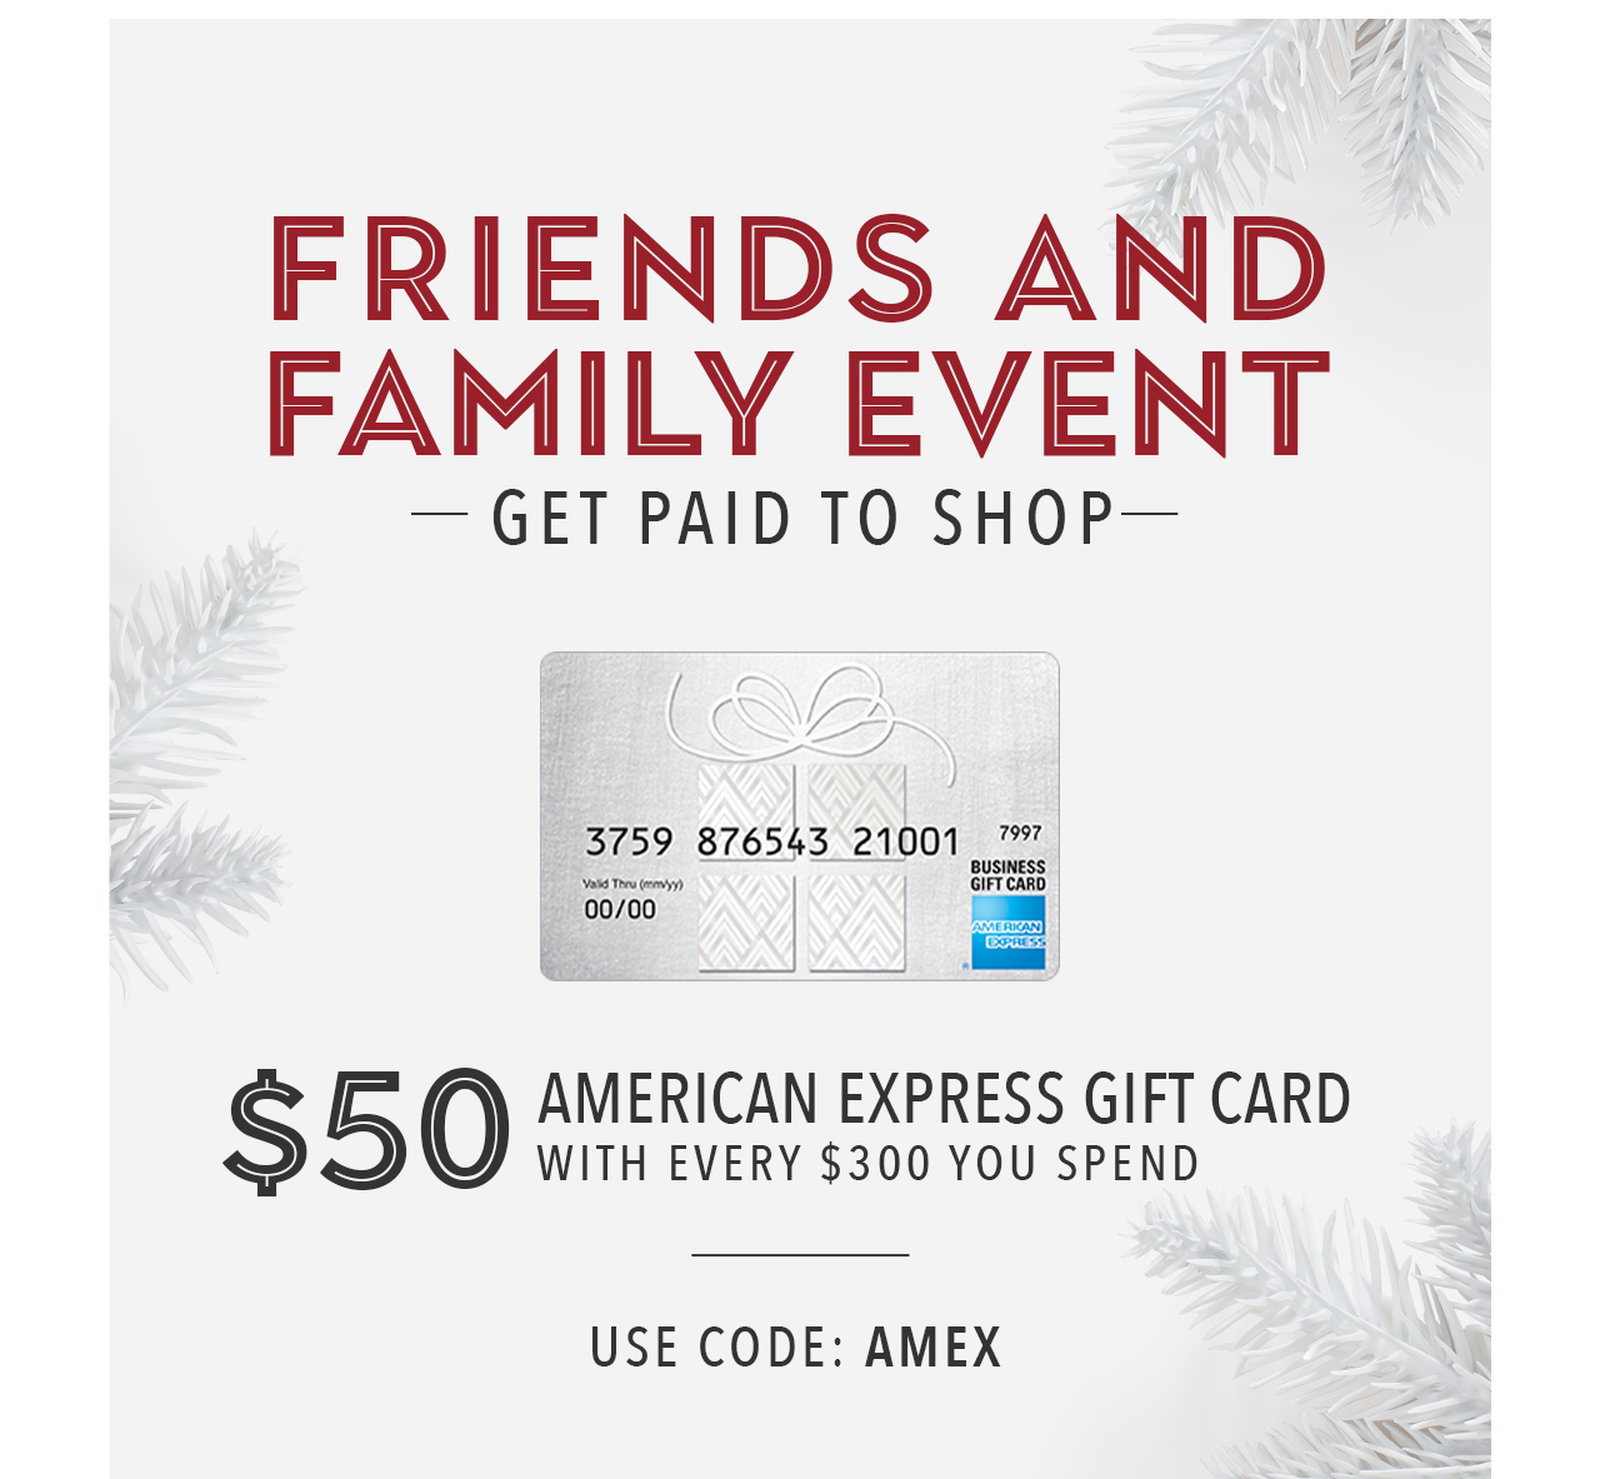 Helzberg Diamonds It S Back 50 Amex Gift Card With Every 300 Spent Milled